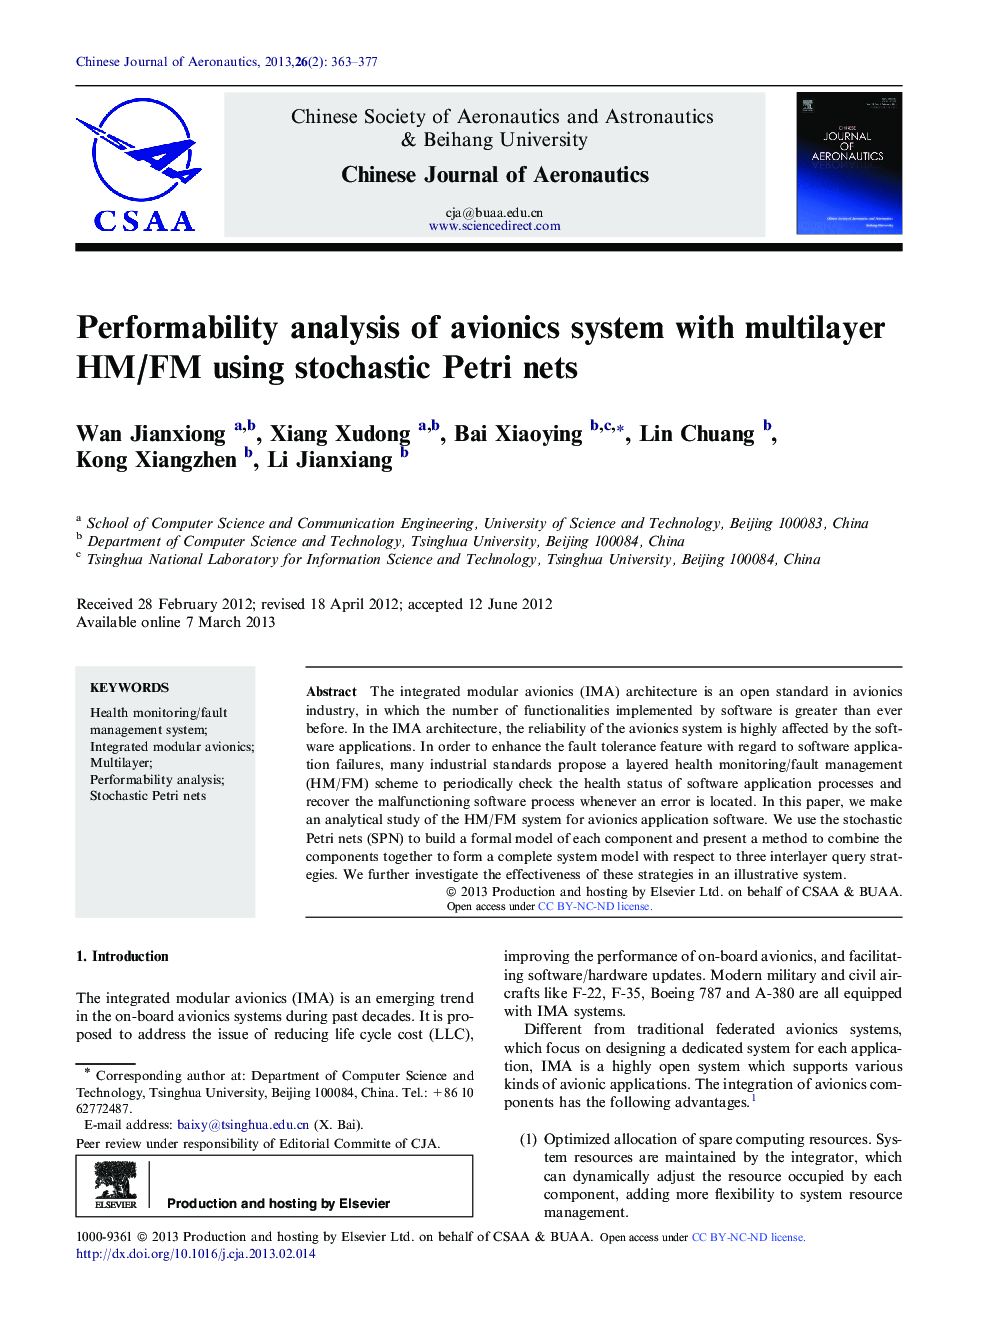 Performability analysis of avionics system with multilayer HM/FM using stochastic Petri nets 